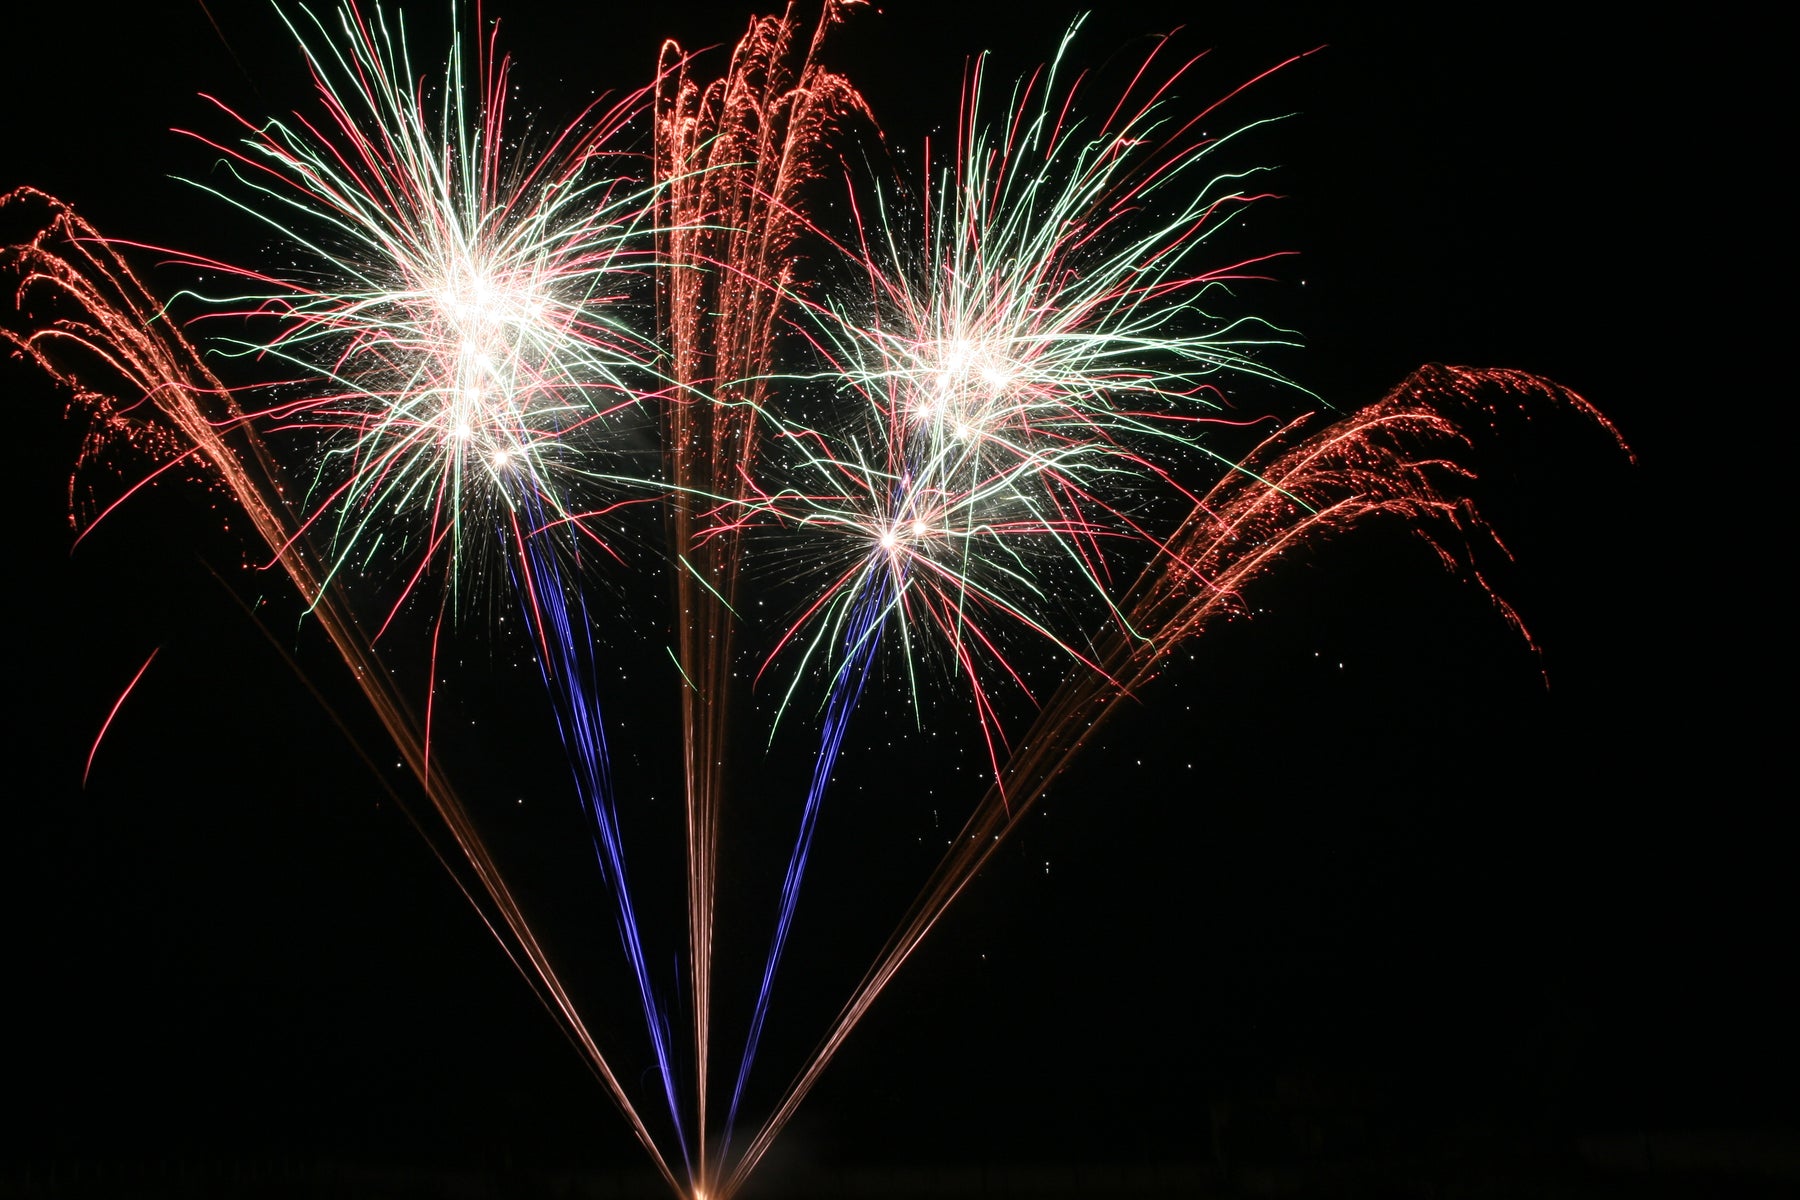 ROUND TABLE CHARITY TO HOST HUGE FIREWORKS EVENT IN OXFORD